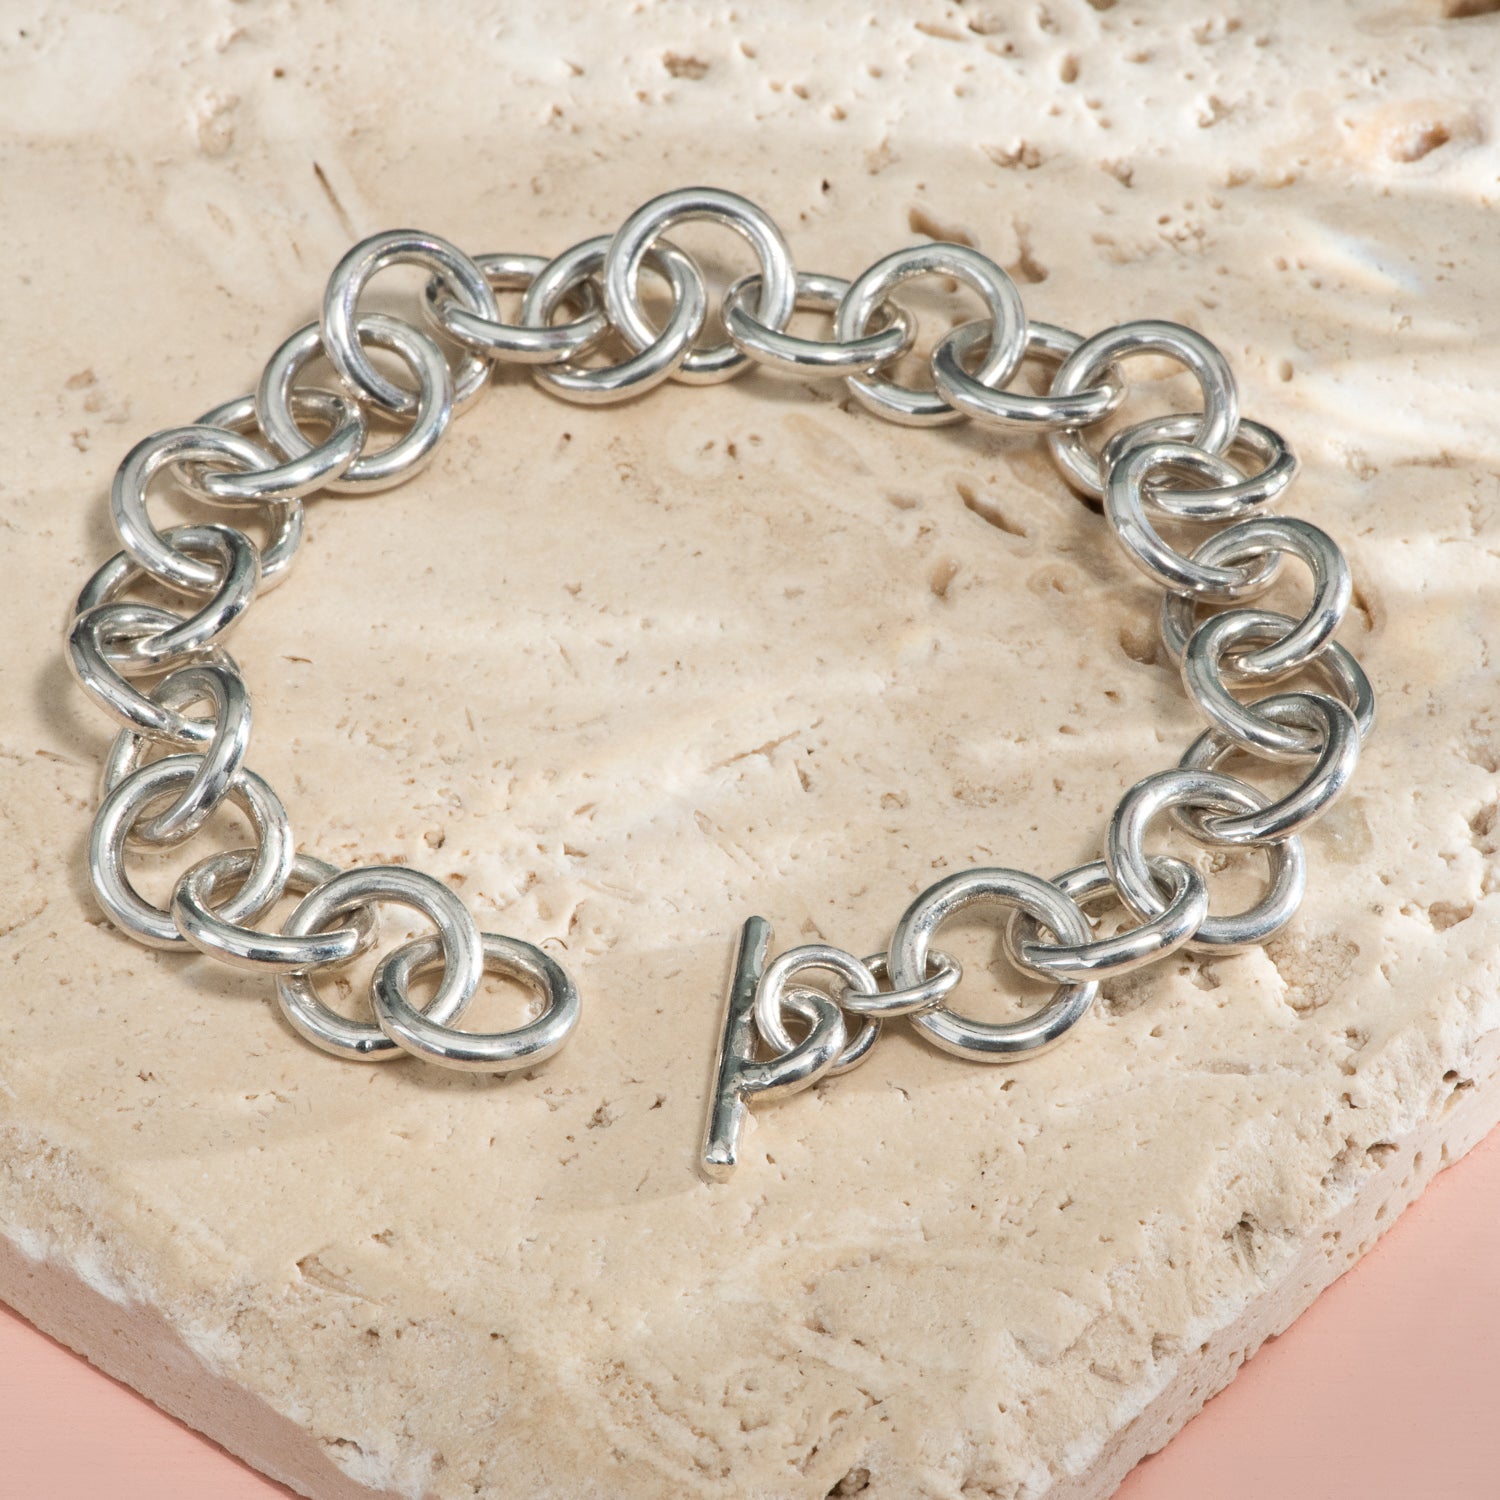 Large, polished circular links of silver form a chain bracelet with a toggle closure.